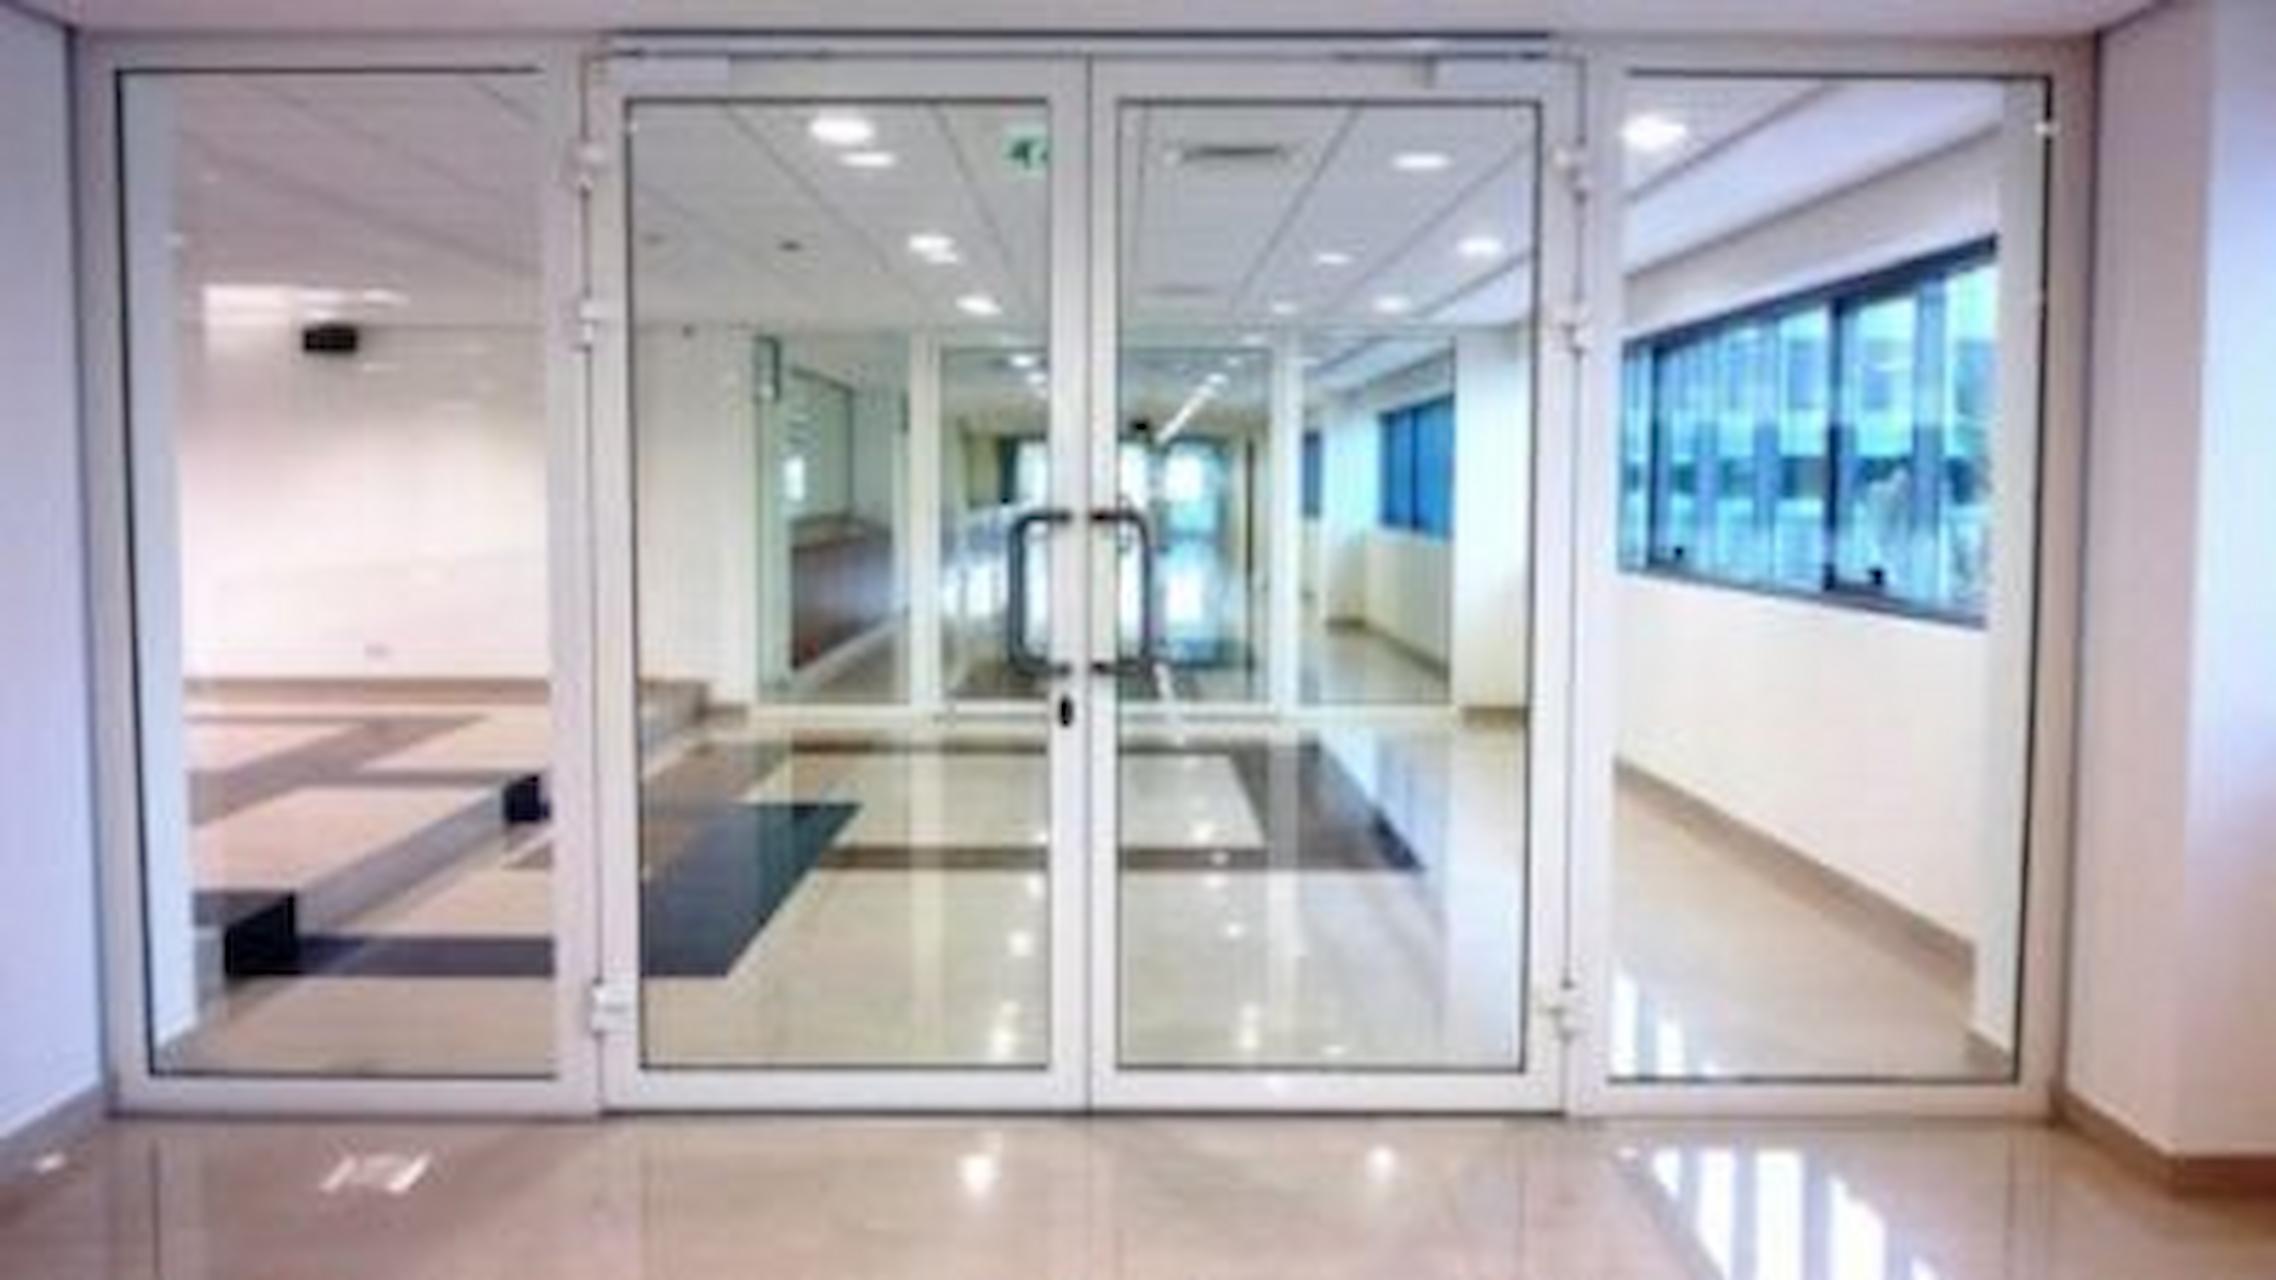 What Are The Prime Advantages Of Installing A Fire Rated Door?